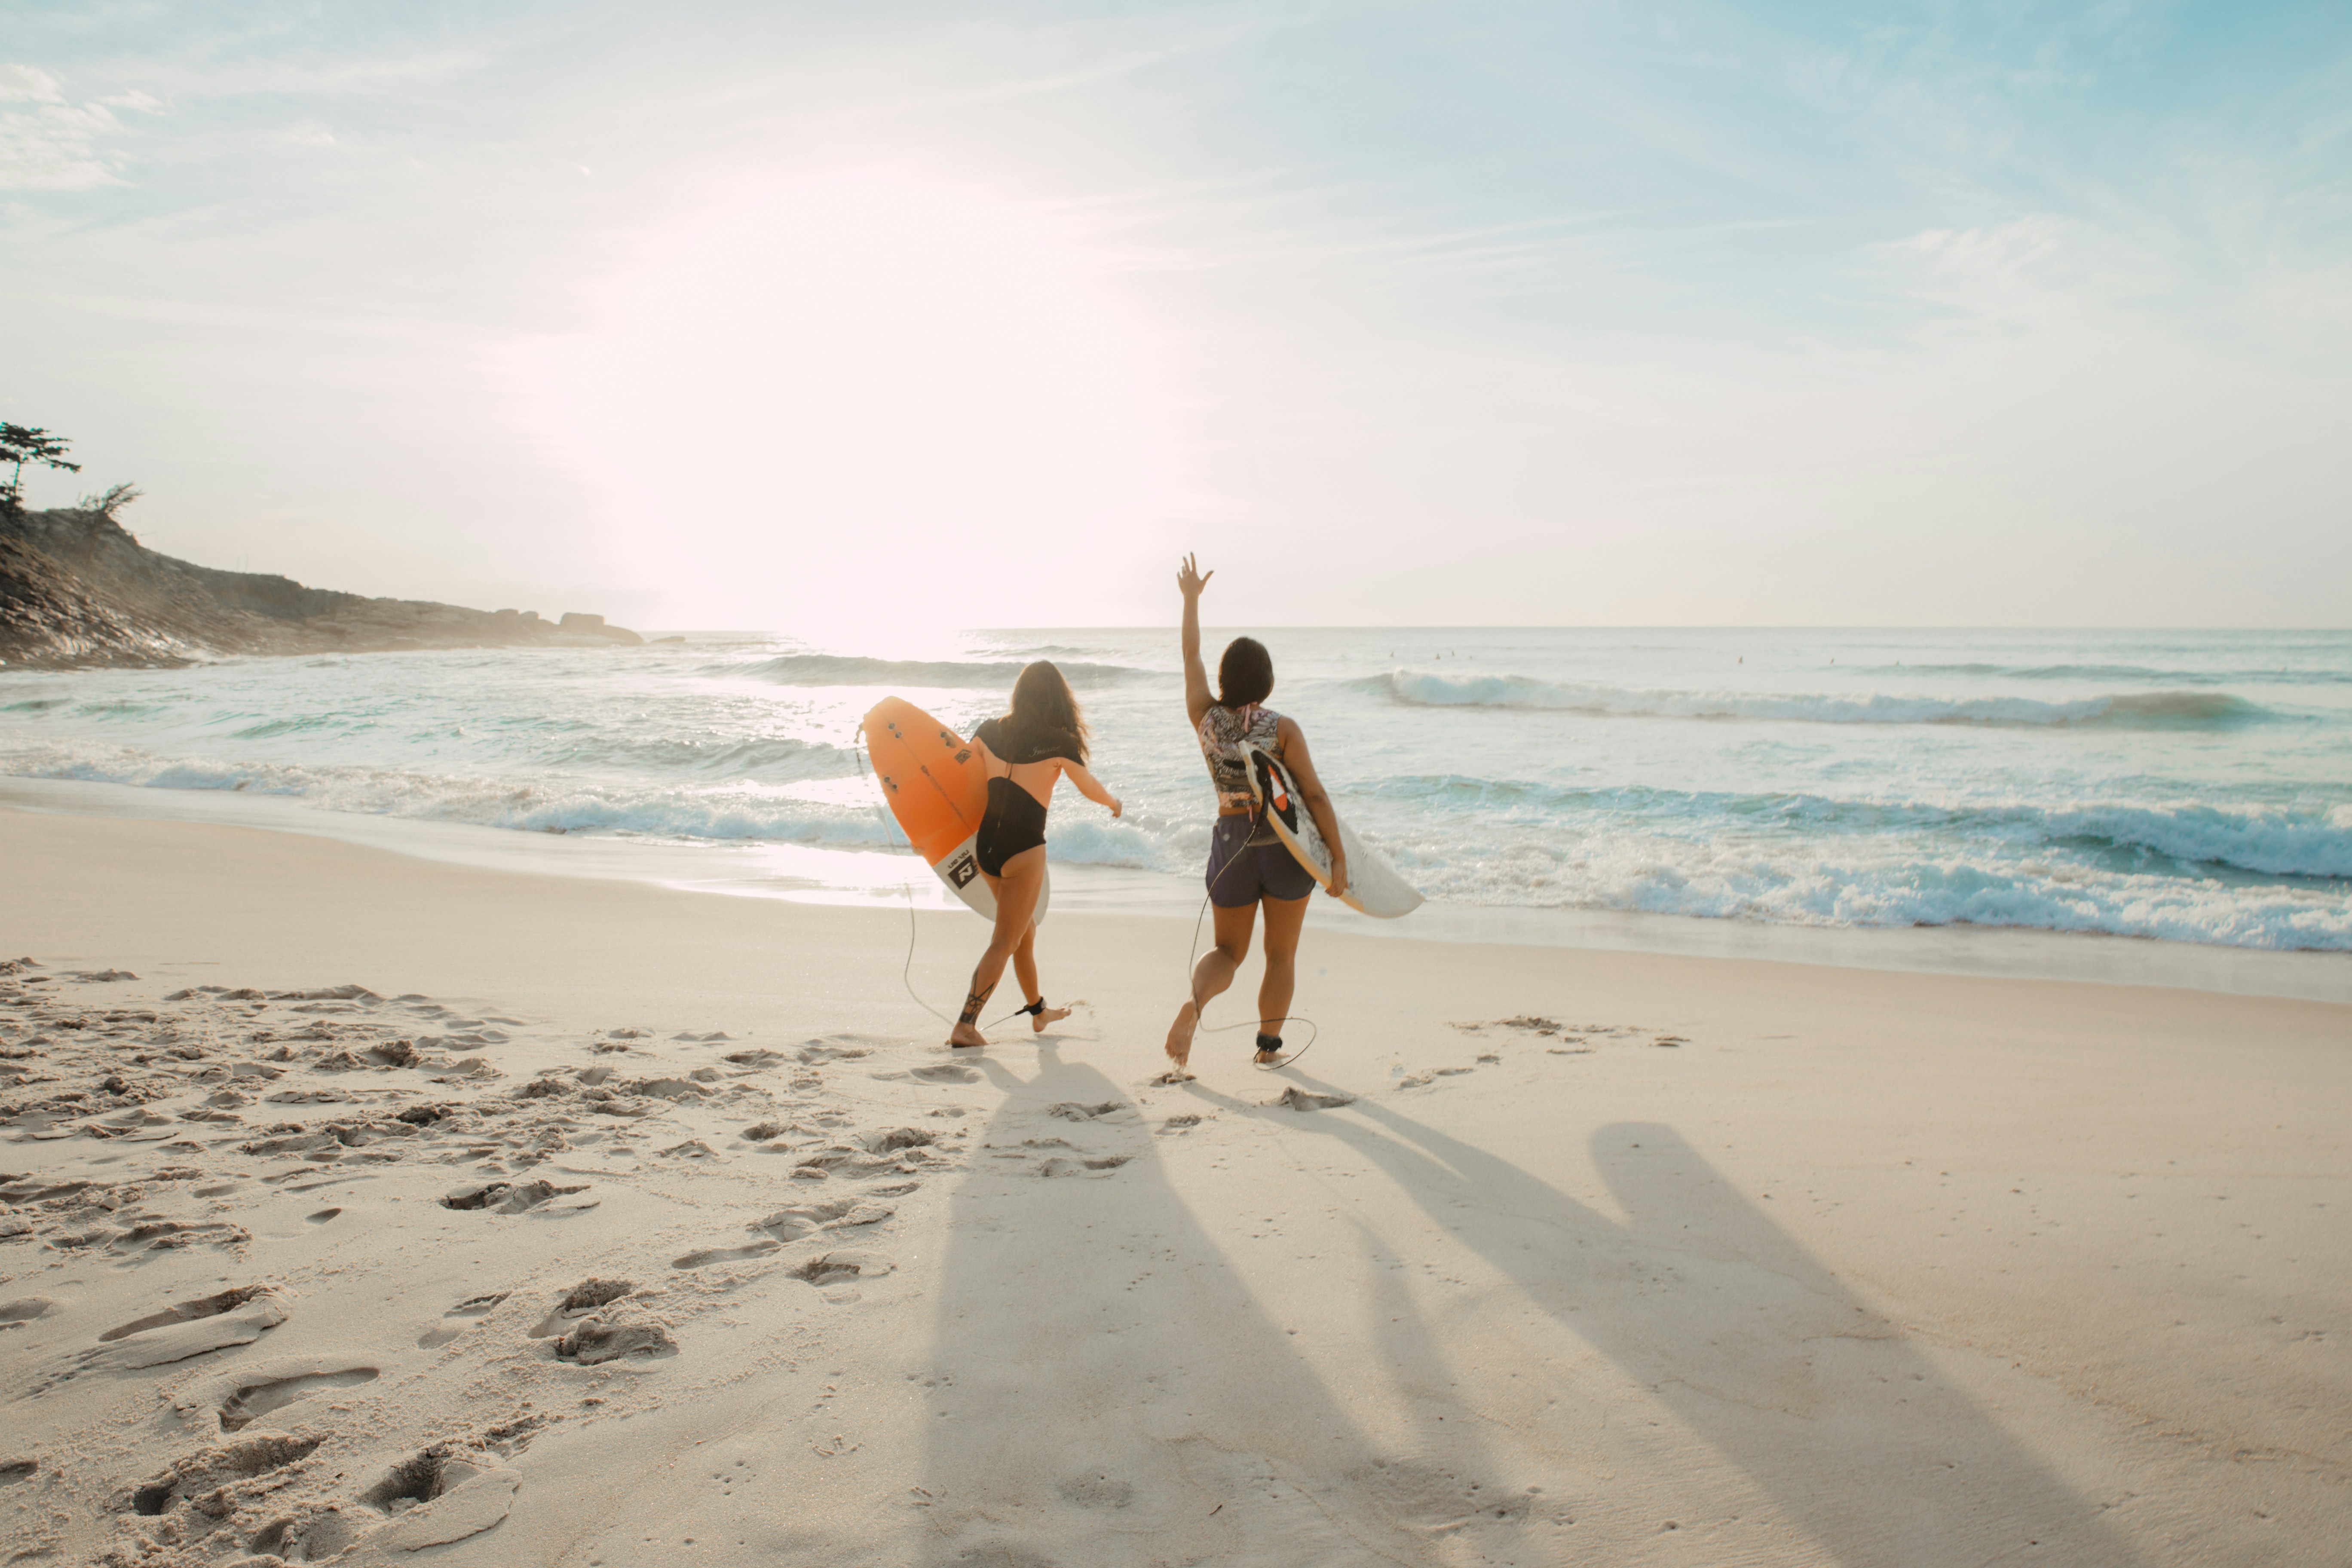 online contests, sweepstakes and giveaways - Surf & Yoga Adventure Getaway to California with your Bestie